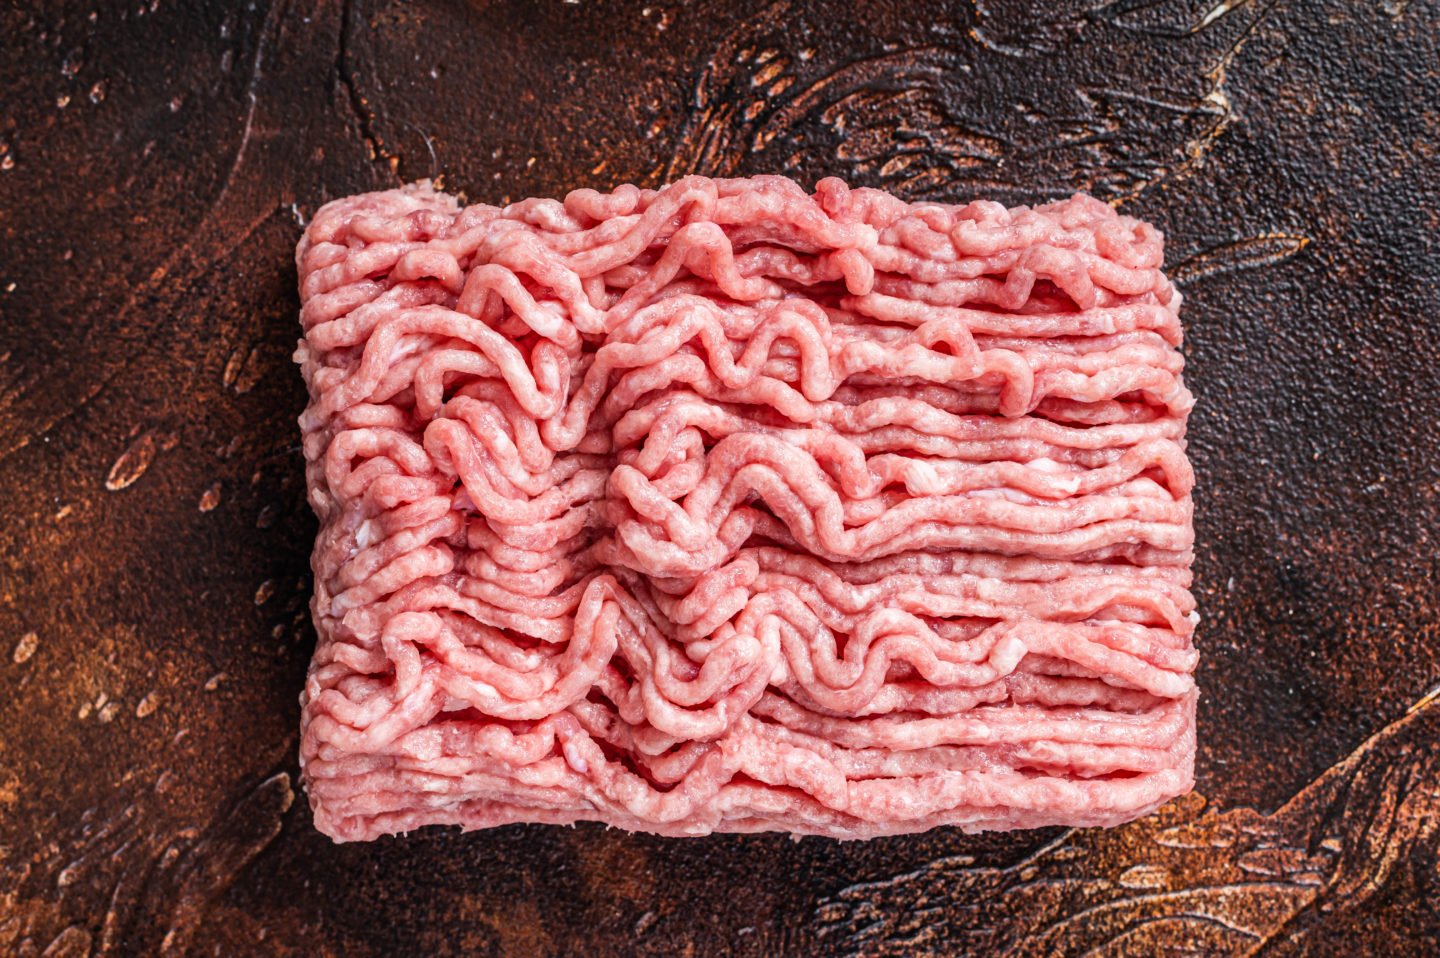 Raw Ground Turkey Meat On Brown Table